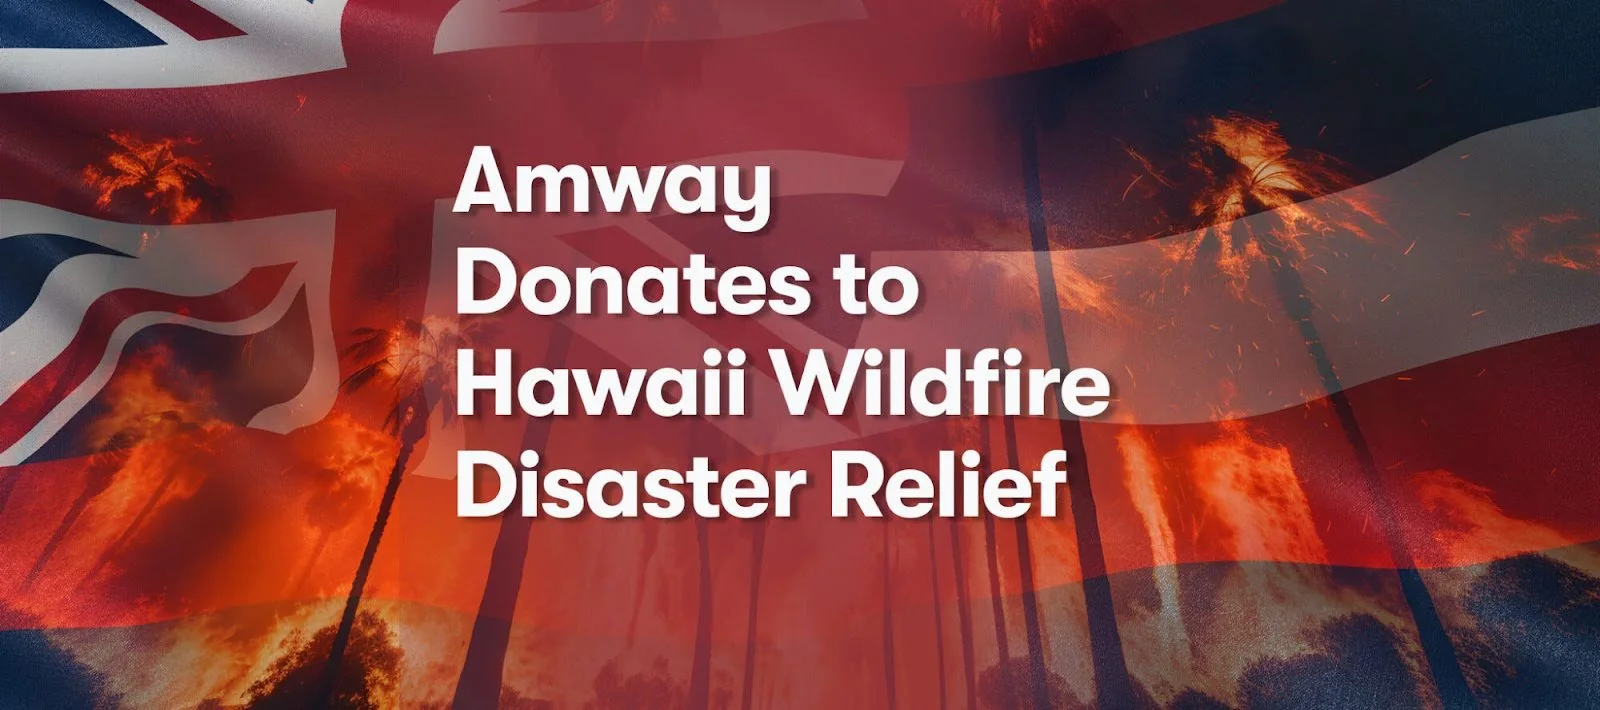 Amway donates to Hawaii wildfire disaster relief.